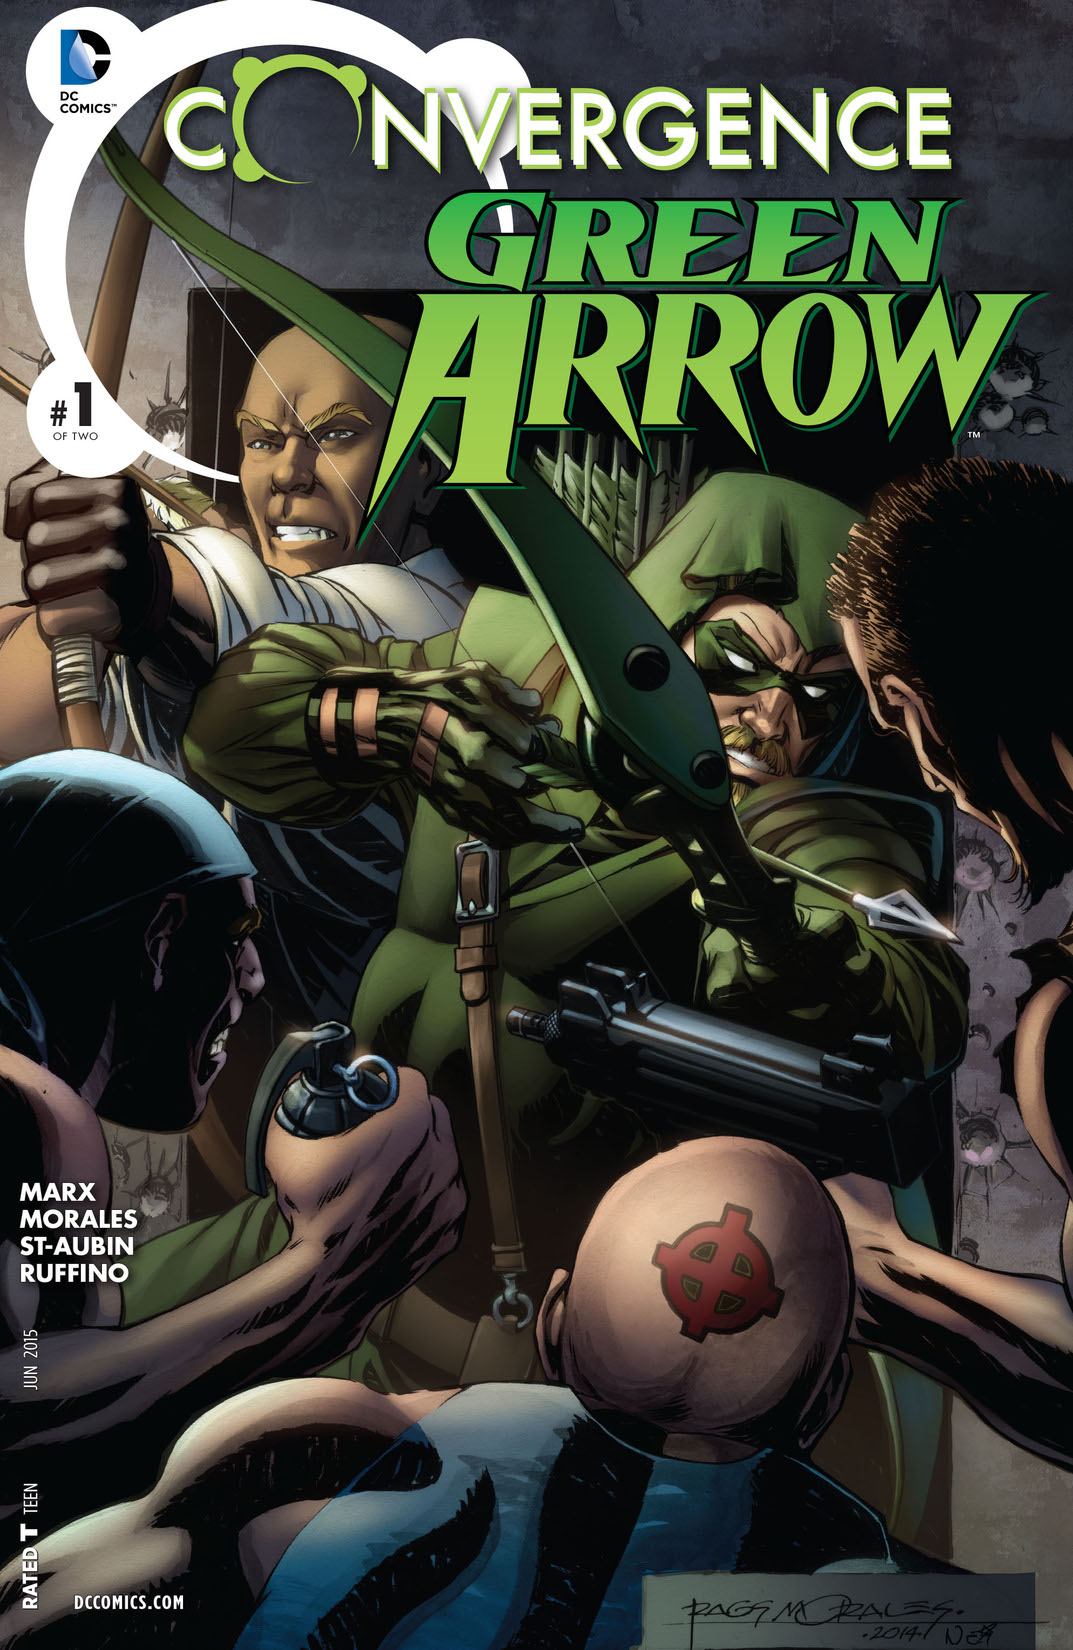 Convergence: Green Arrow #1 preview images